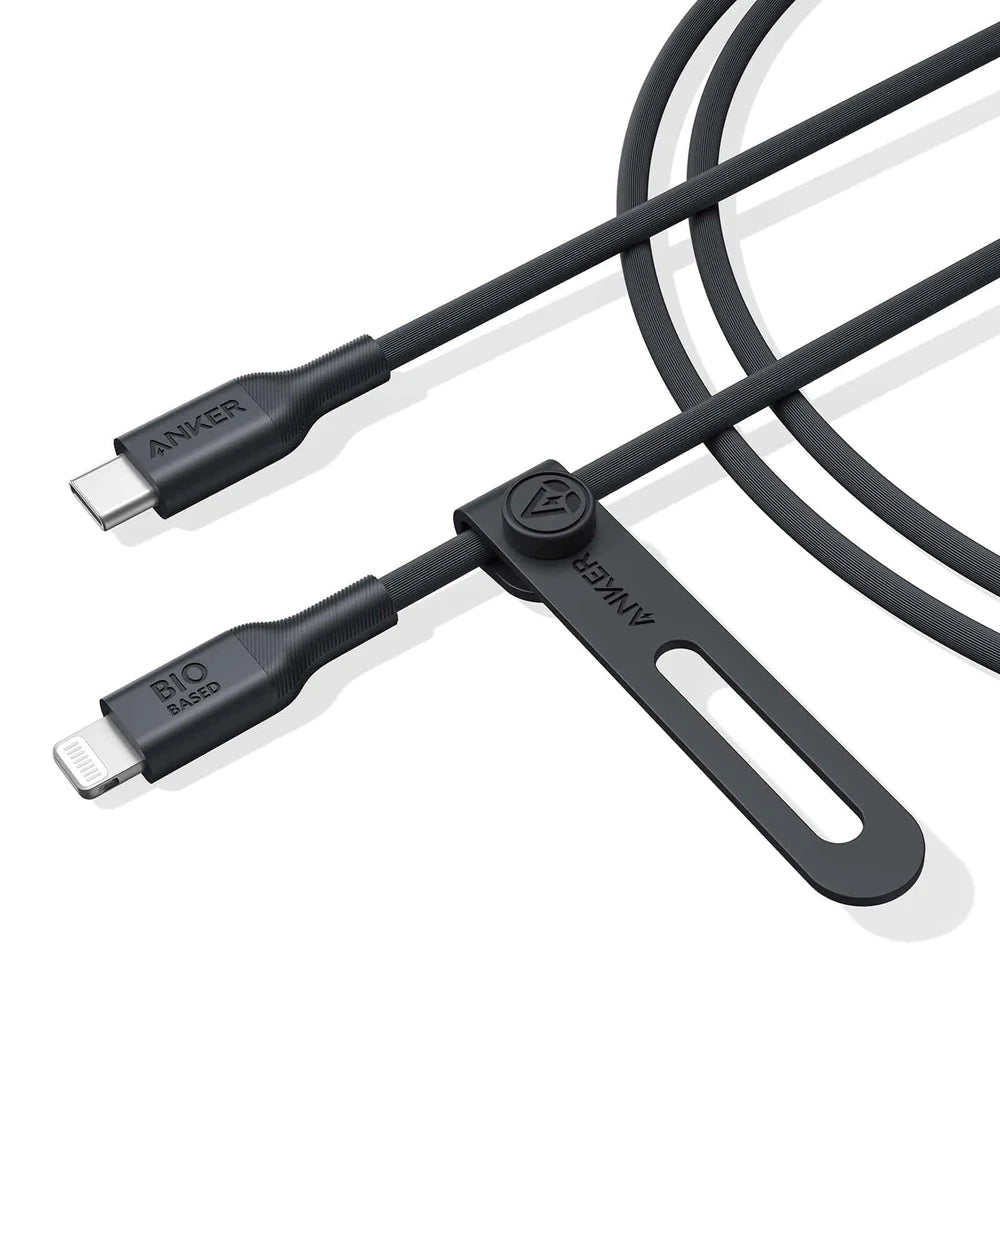 Anker 544 USB-C to USB-C Cable (Bio-Based 6ft / 1.8m)